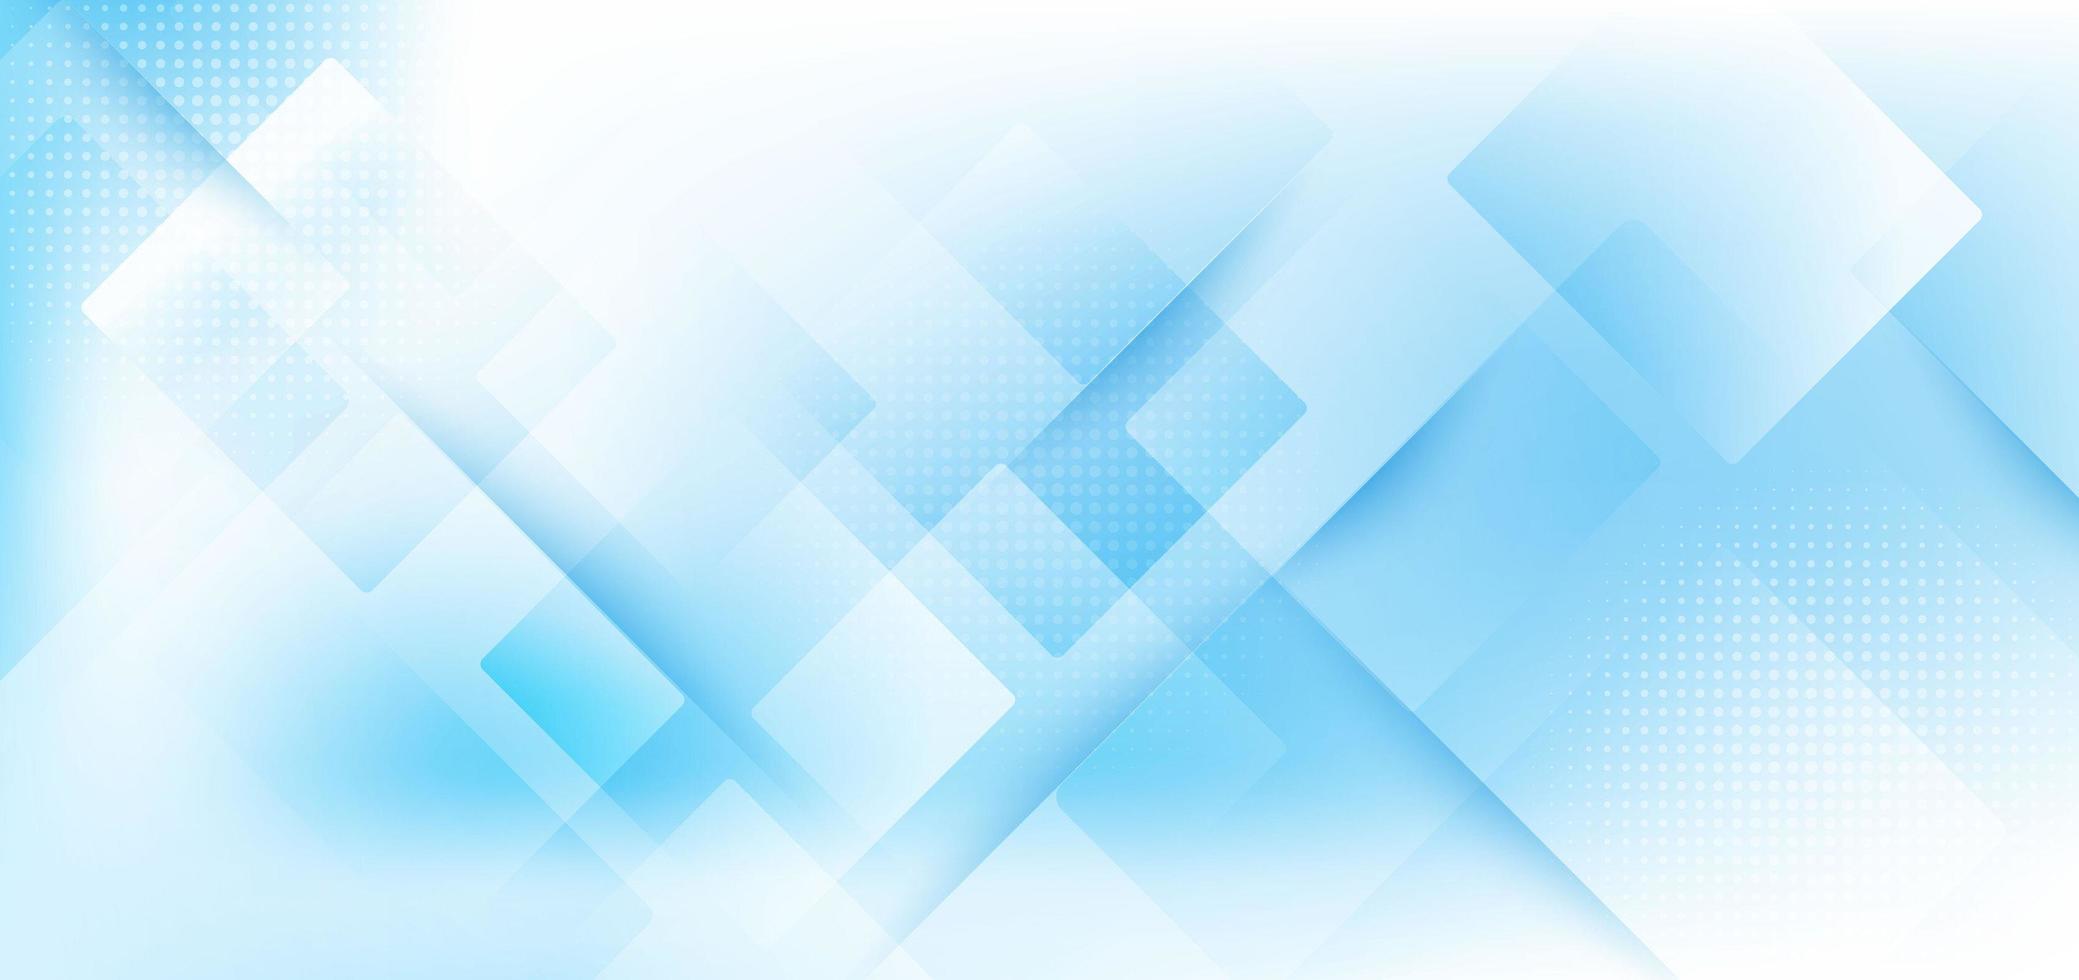 Abstract template background white and bright blue squares overlapping with halftone and texture. vector